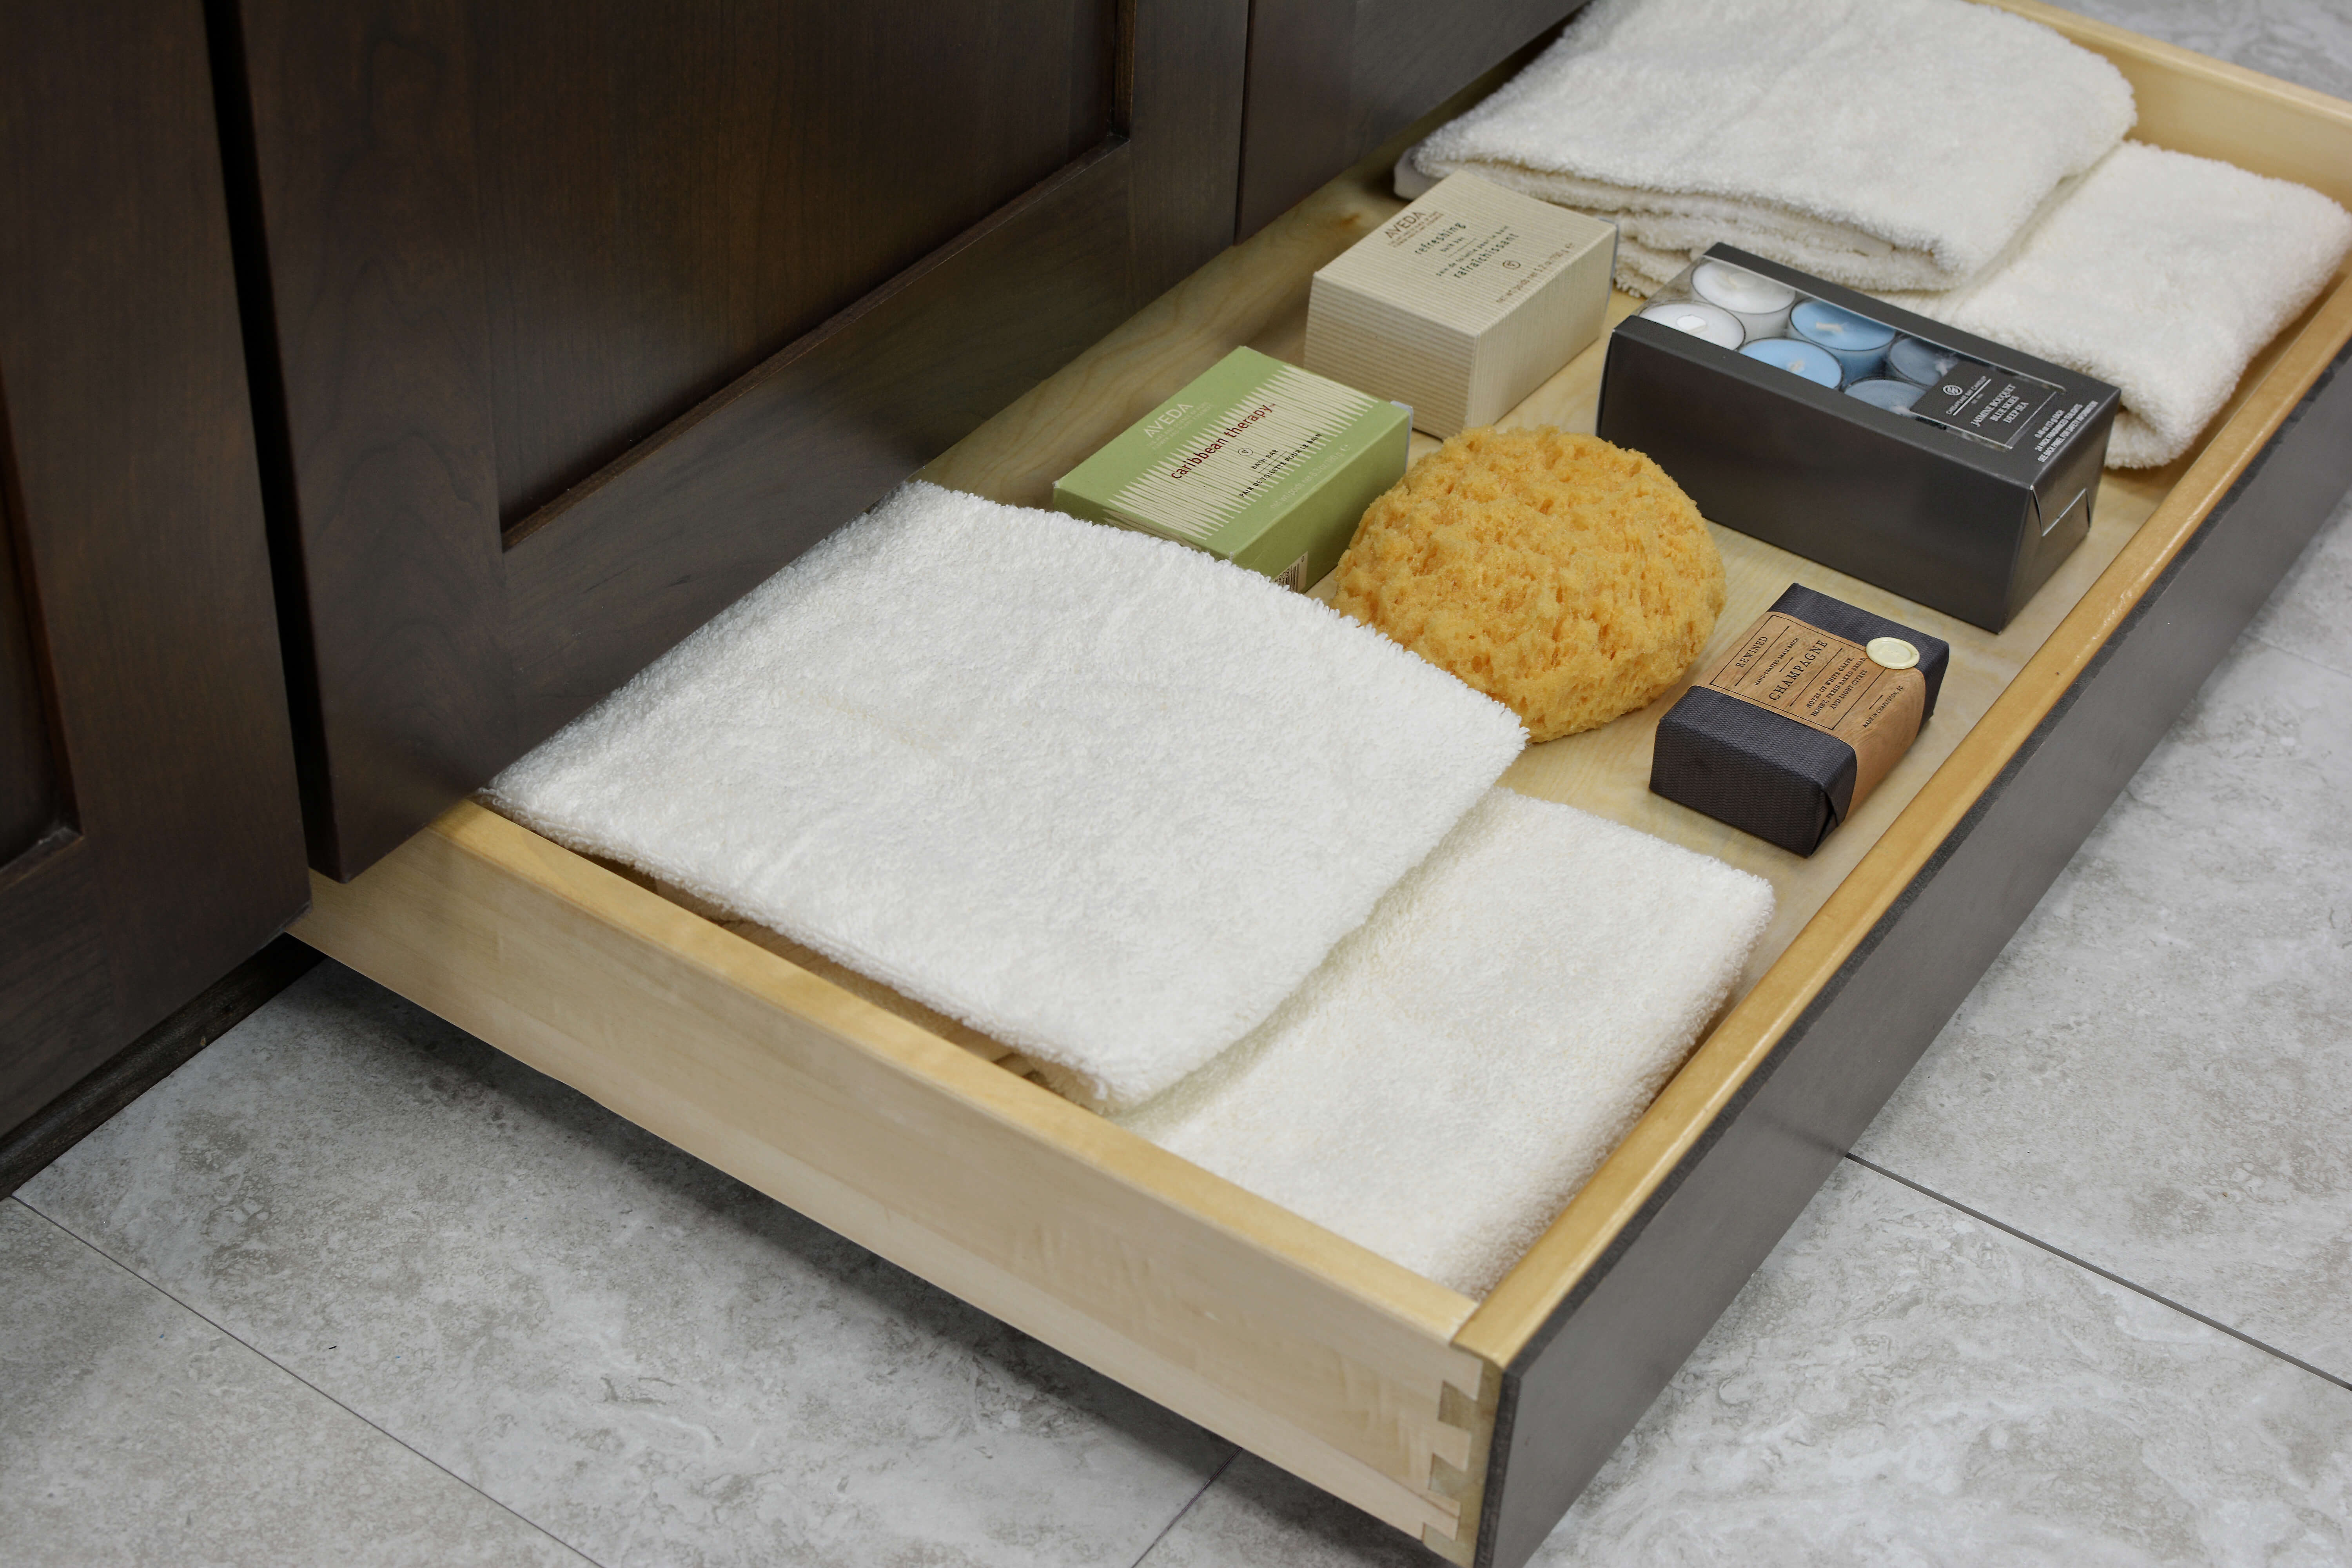 Miscellaneous items can find a home in a Dura Supreme Toe-Kick drawer hidden at the foot of your cabinets. It is the perfect place for stashing your spare bathroom supplies to they’re out of the way, yet close at hand when you need to restock.